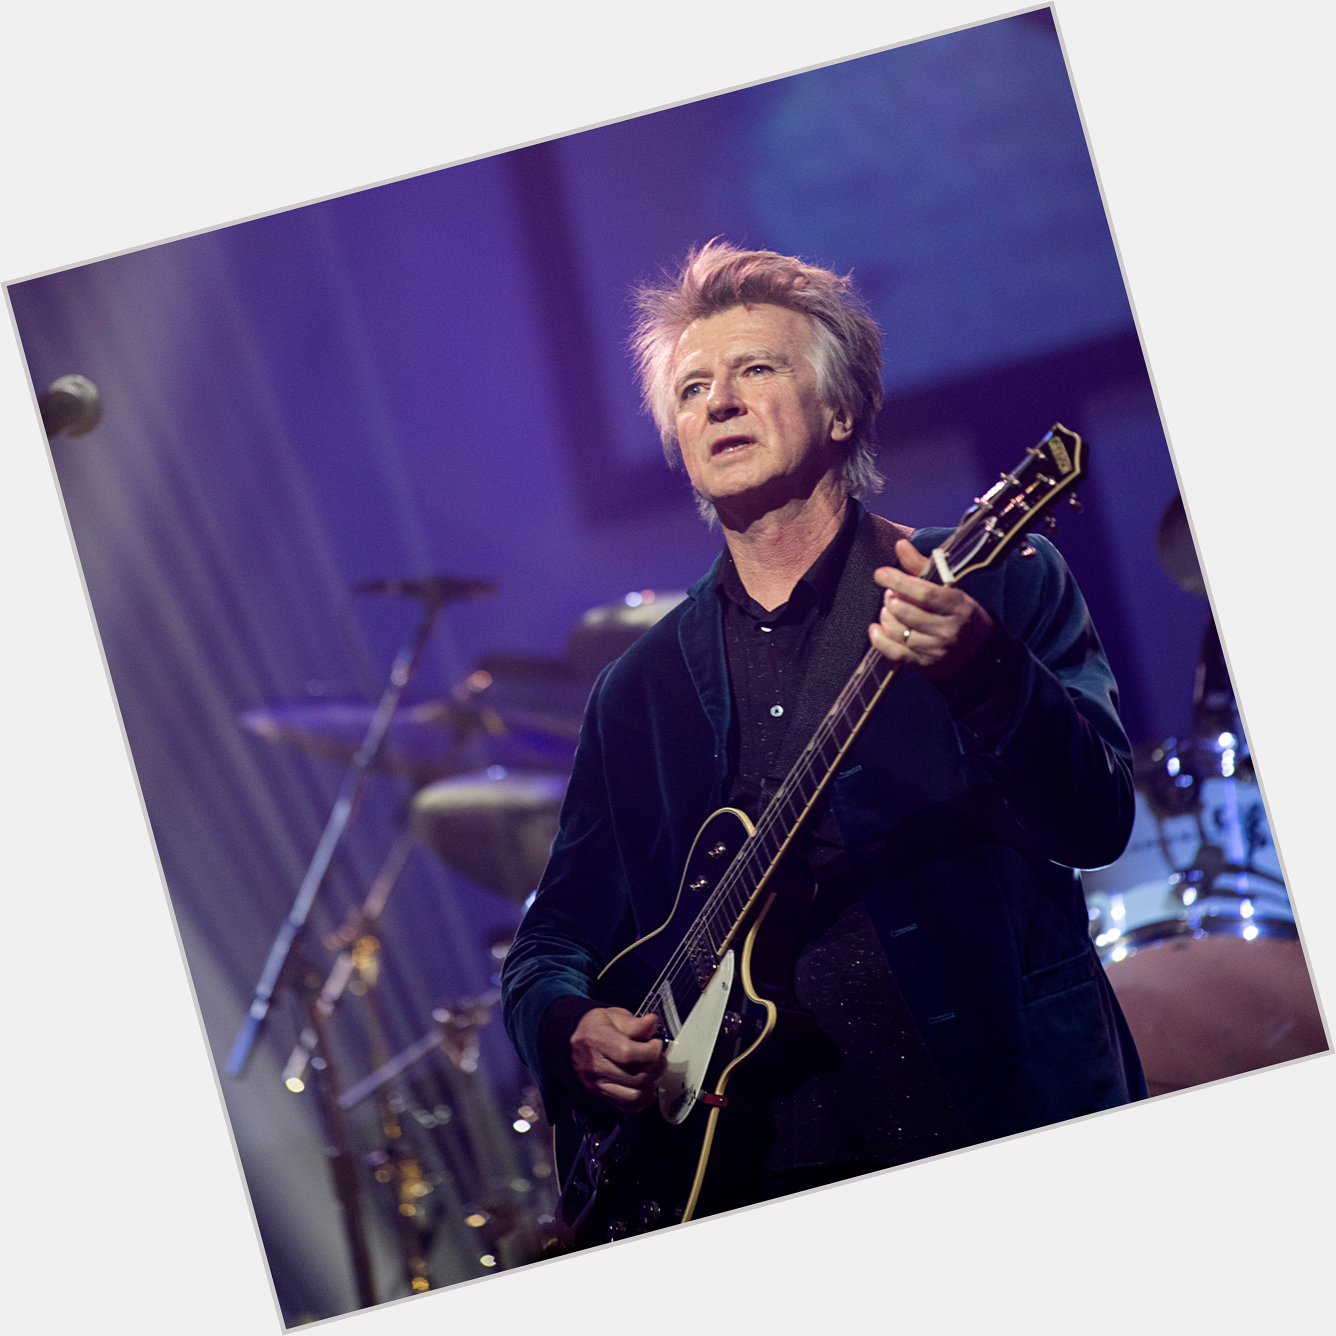 Happy birthday to one of our favourite Kiwis, Neil Finn! Have a wonderful day x 